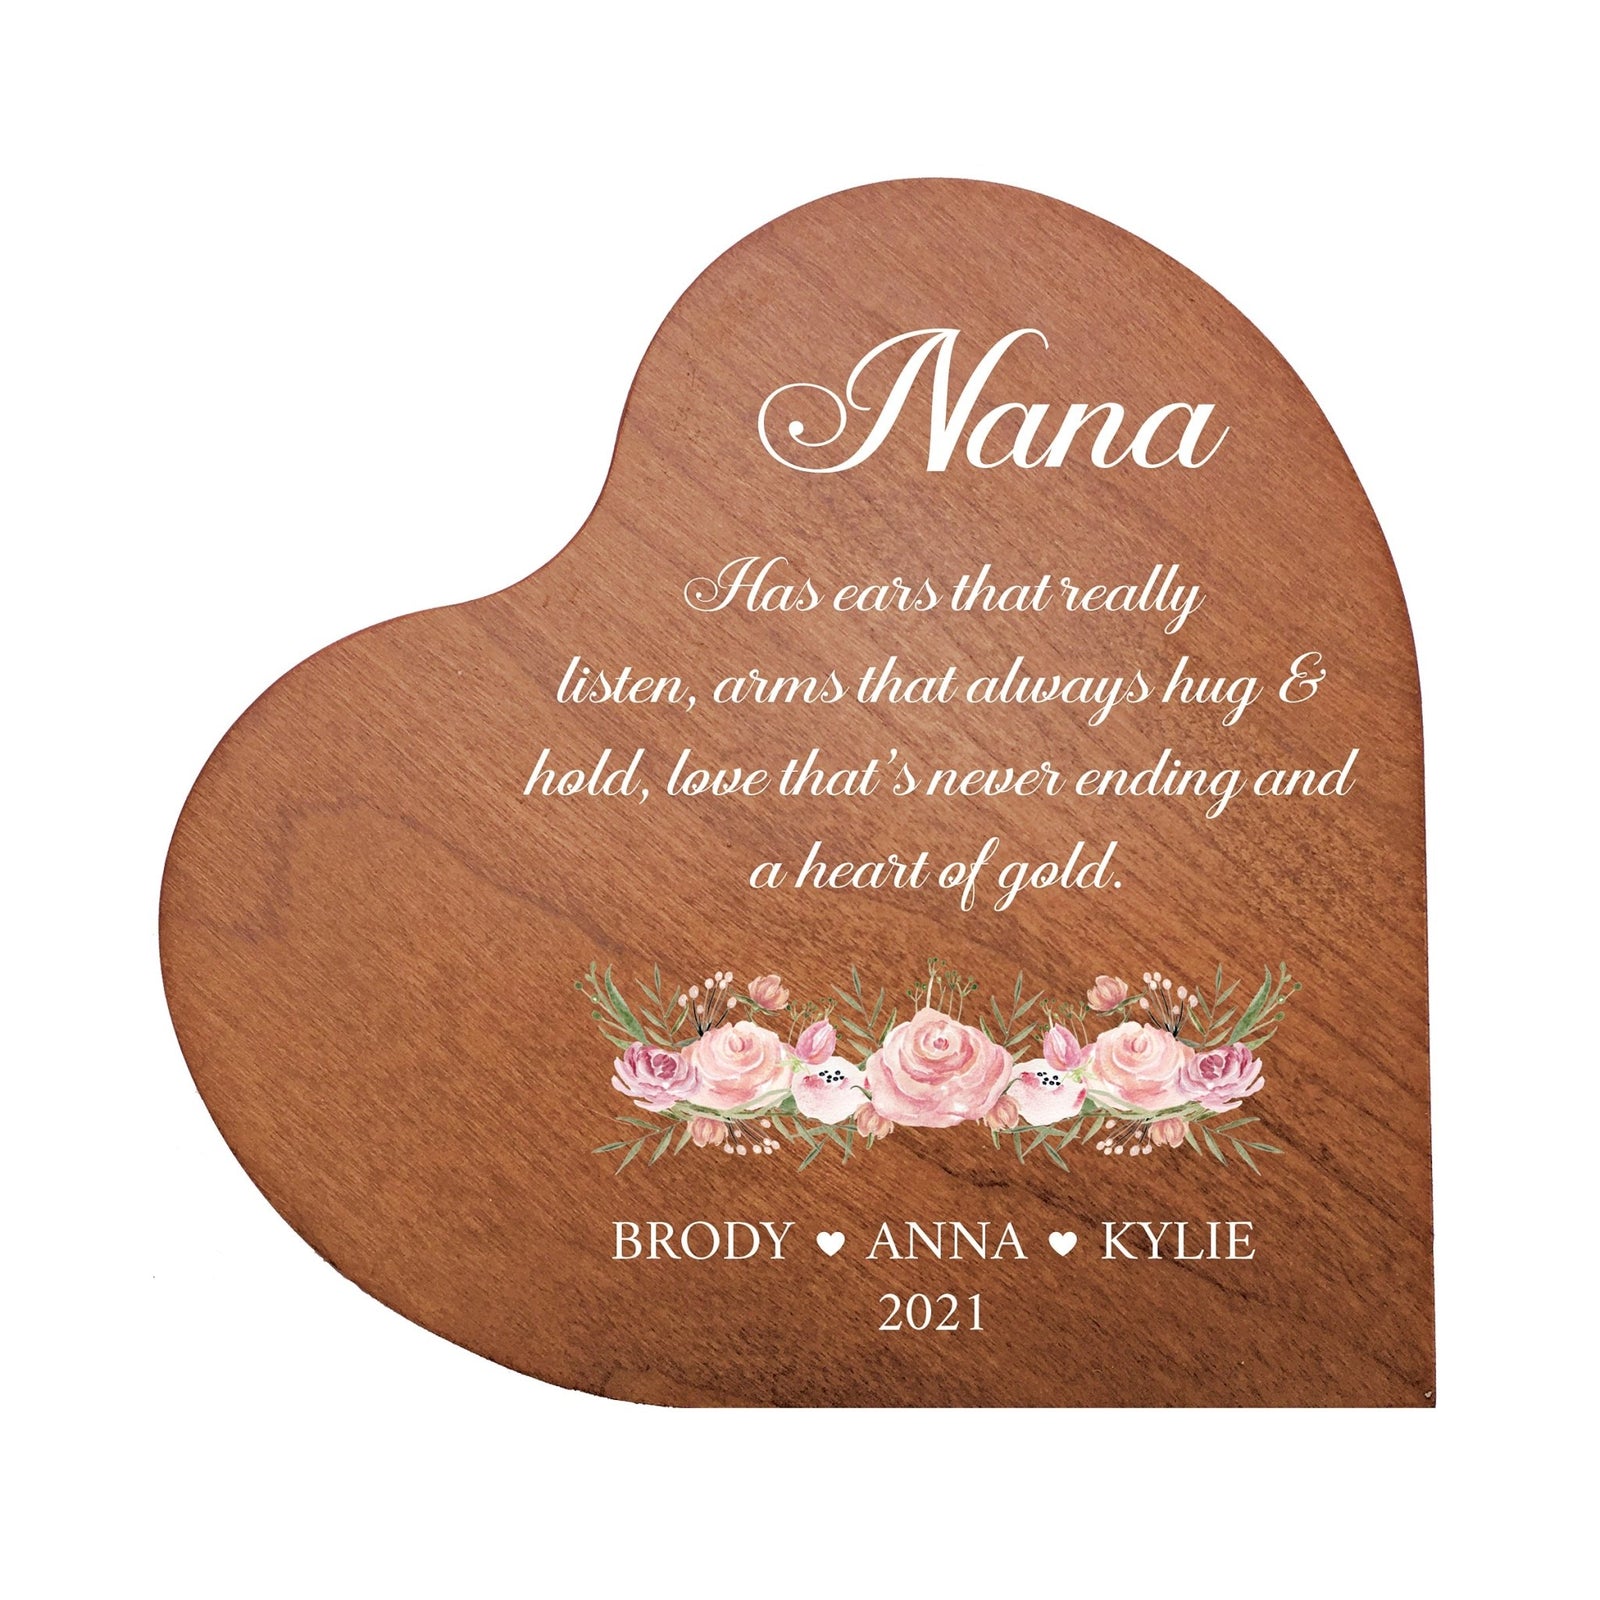 Personalized Grandmother’s Love Heart Block 5in with Inspirational verse - Nana, A Heart of Gold - LifeSong Milestones